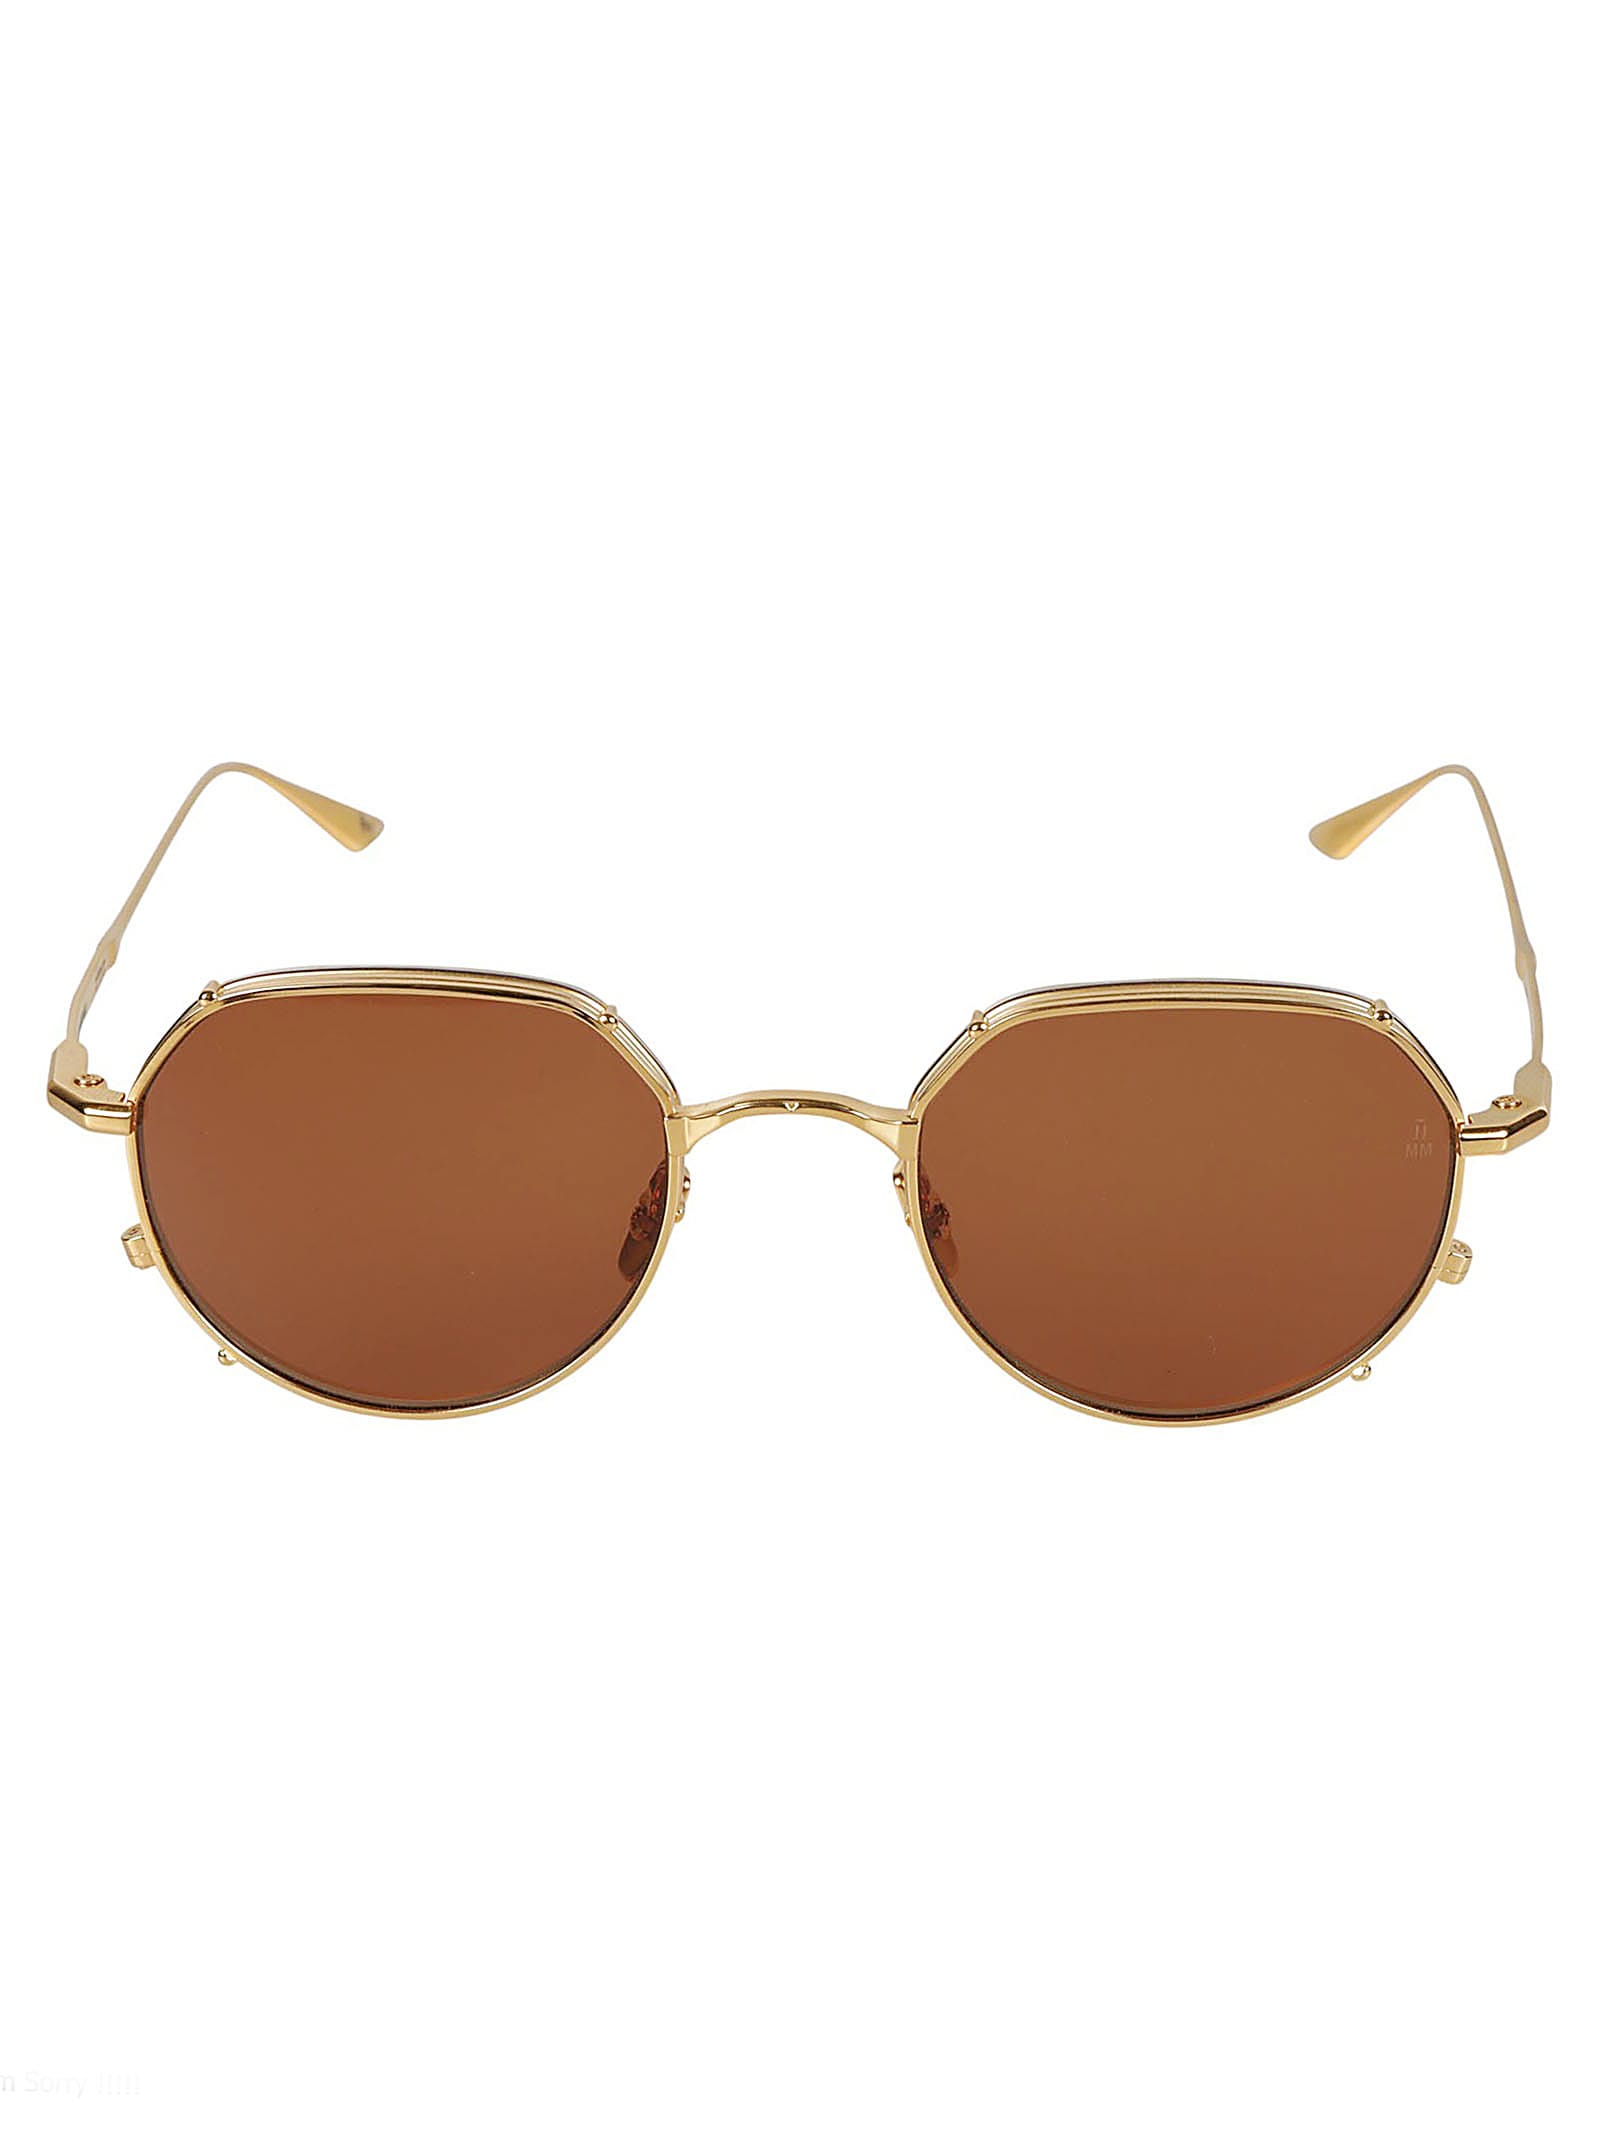 Jacques Marie Mage Hartana Sunglasses Sunglasses In Gold